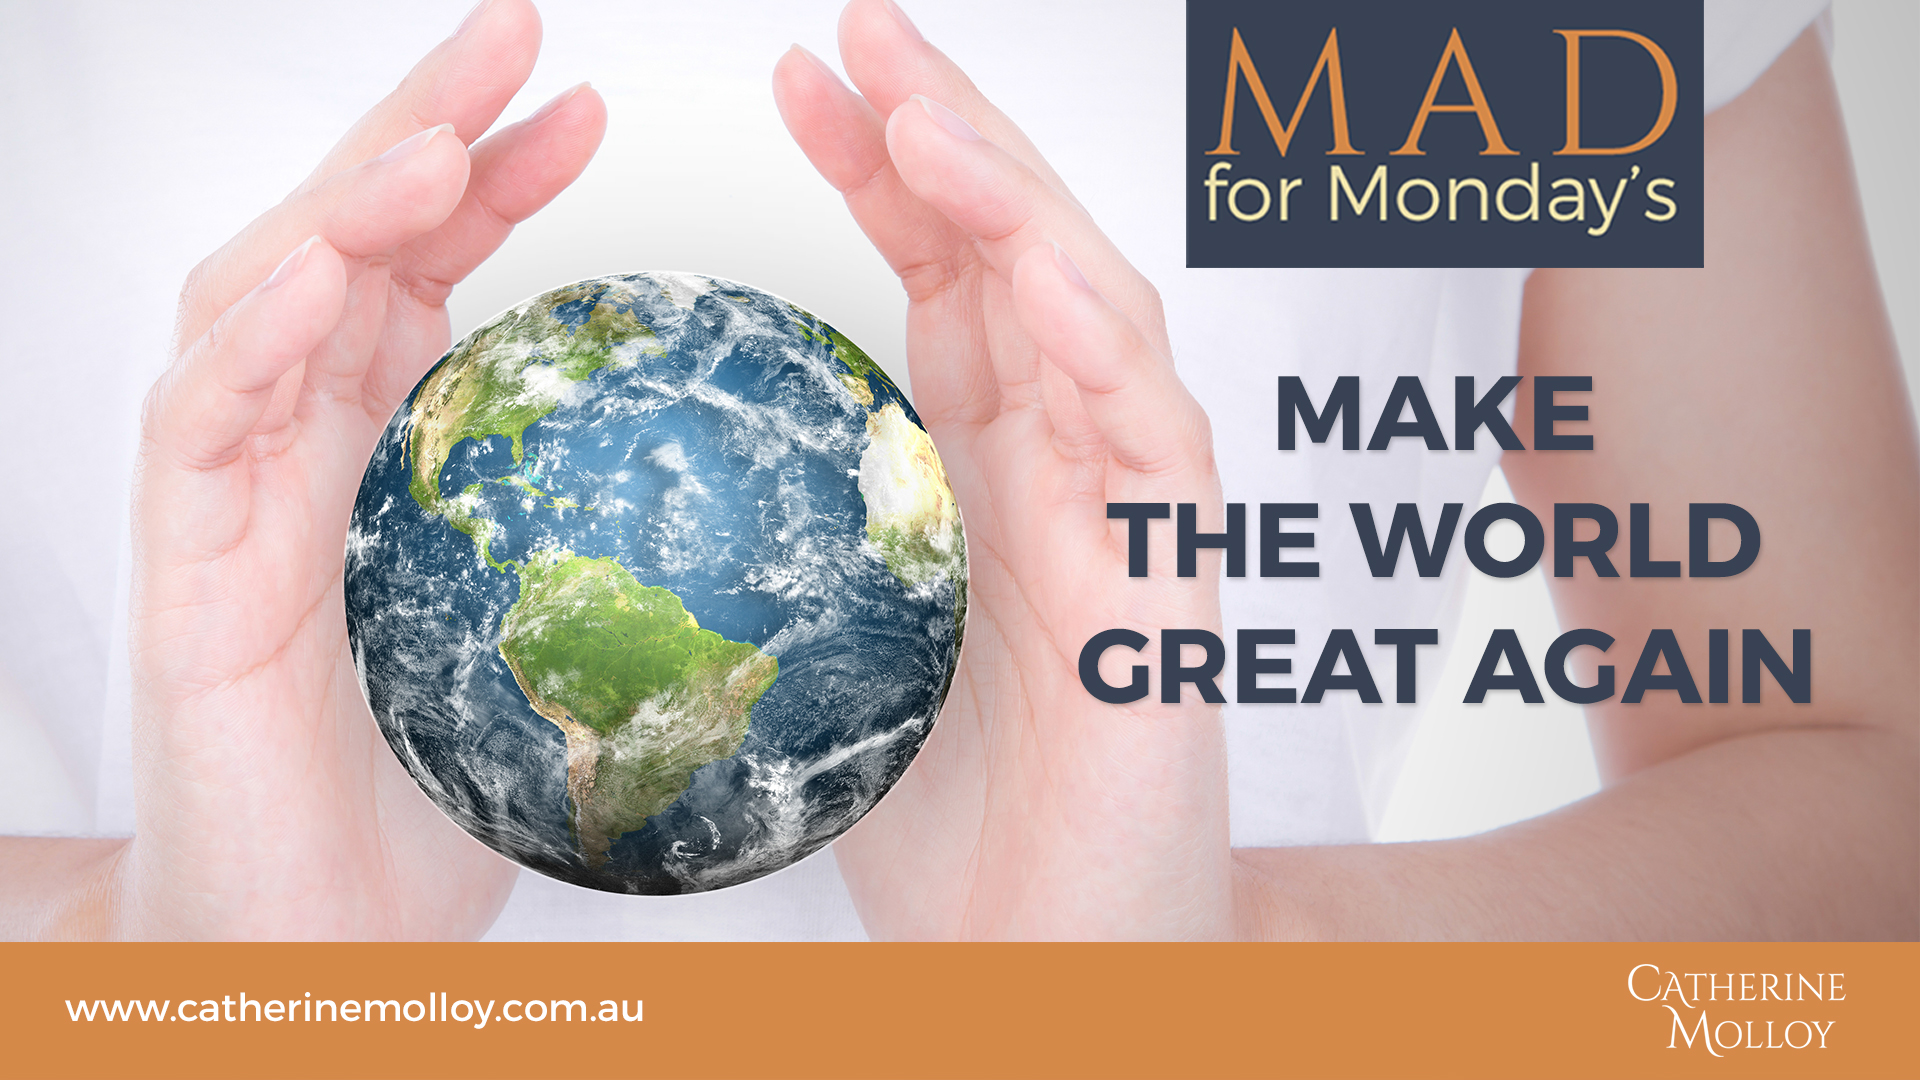 MAD for Monday’s – Make The World Great Again